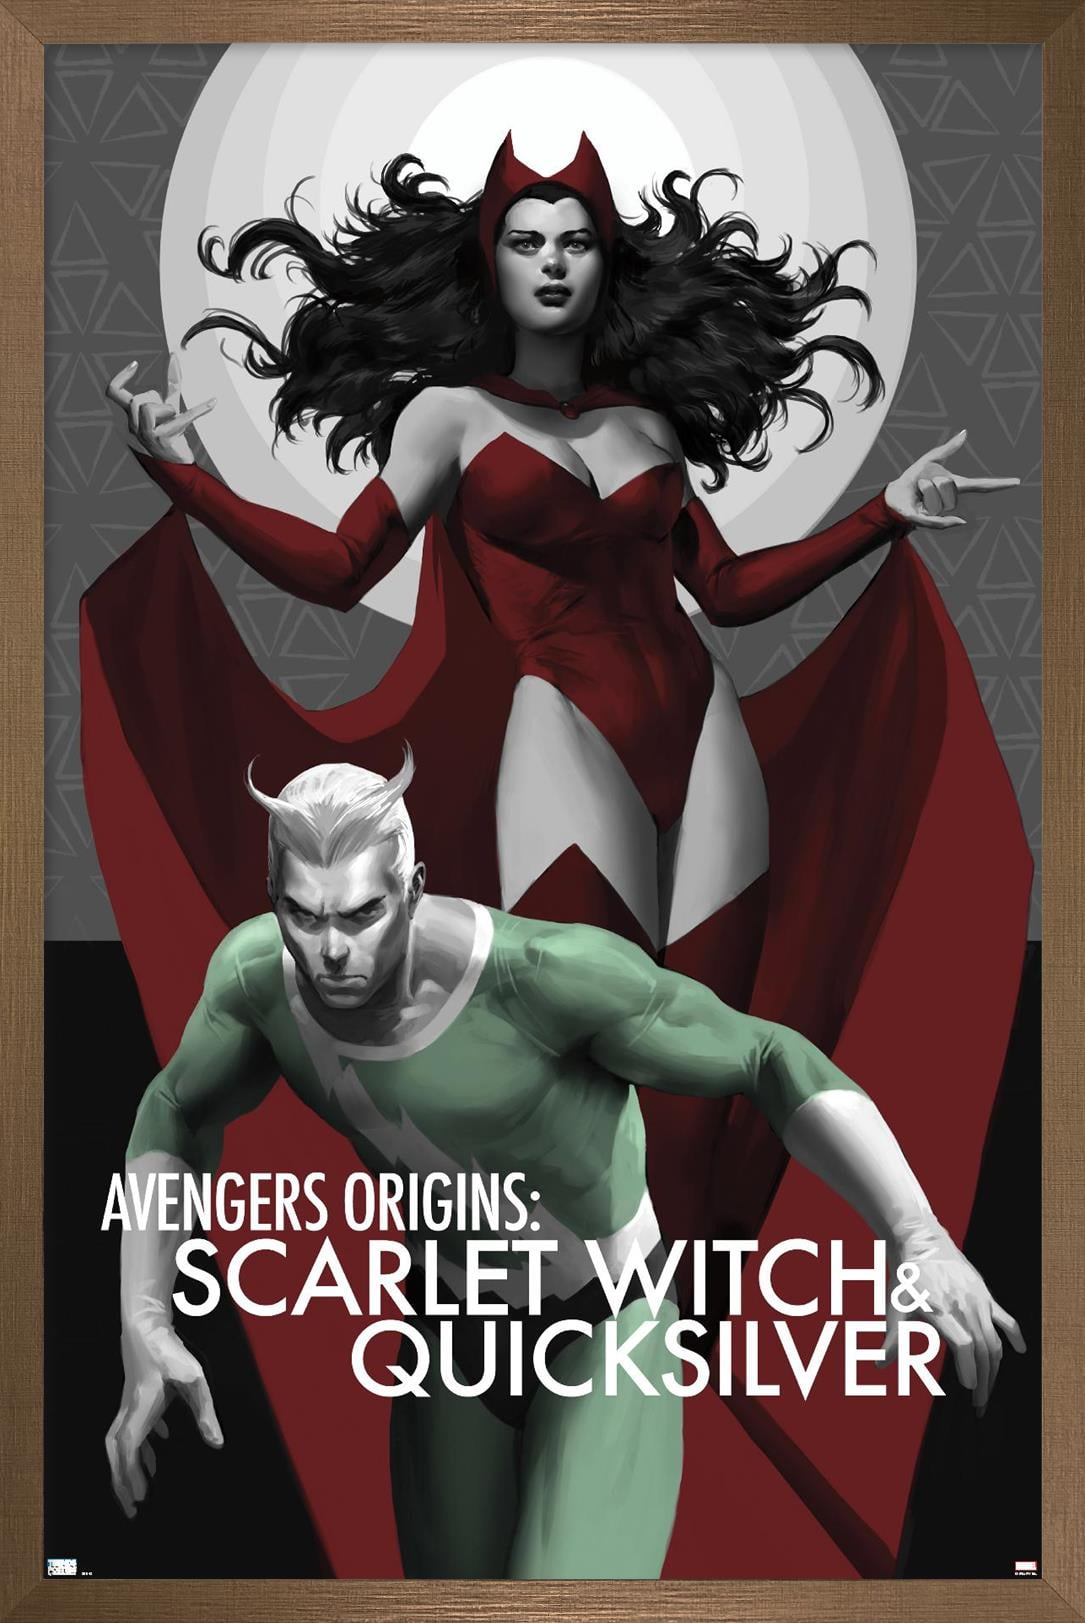 Marvel Comics - Scarlet Witch - The Scarlet Witch & Quicksilver #1 Wall  Poster, 22.375 x 34, Framed 